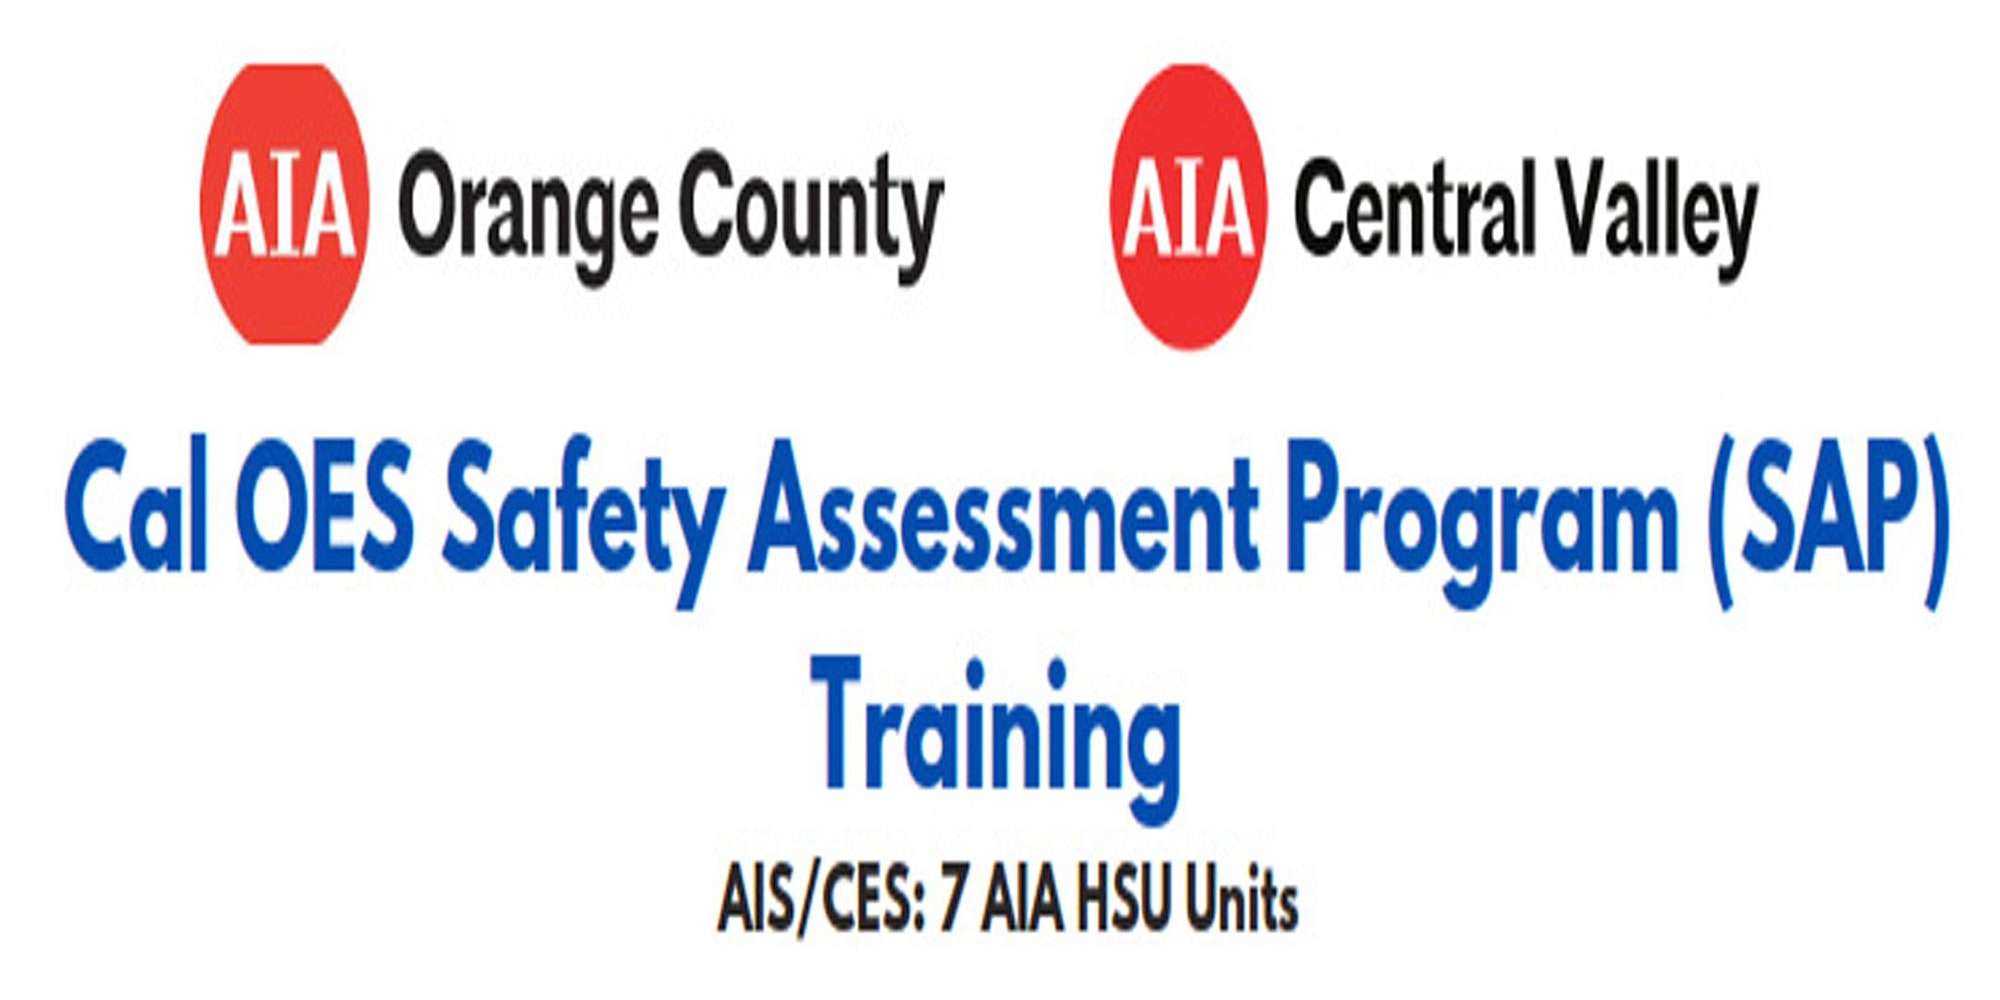 Cal OES Safety Assessment Program